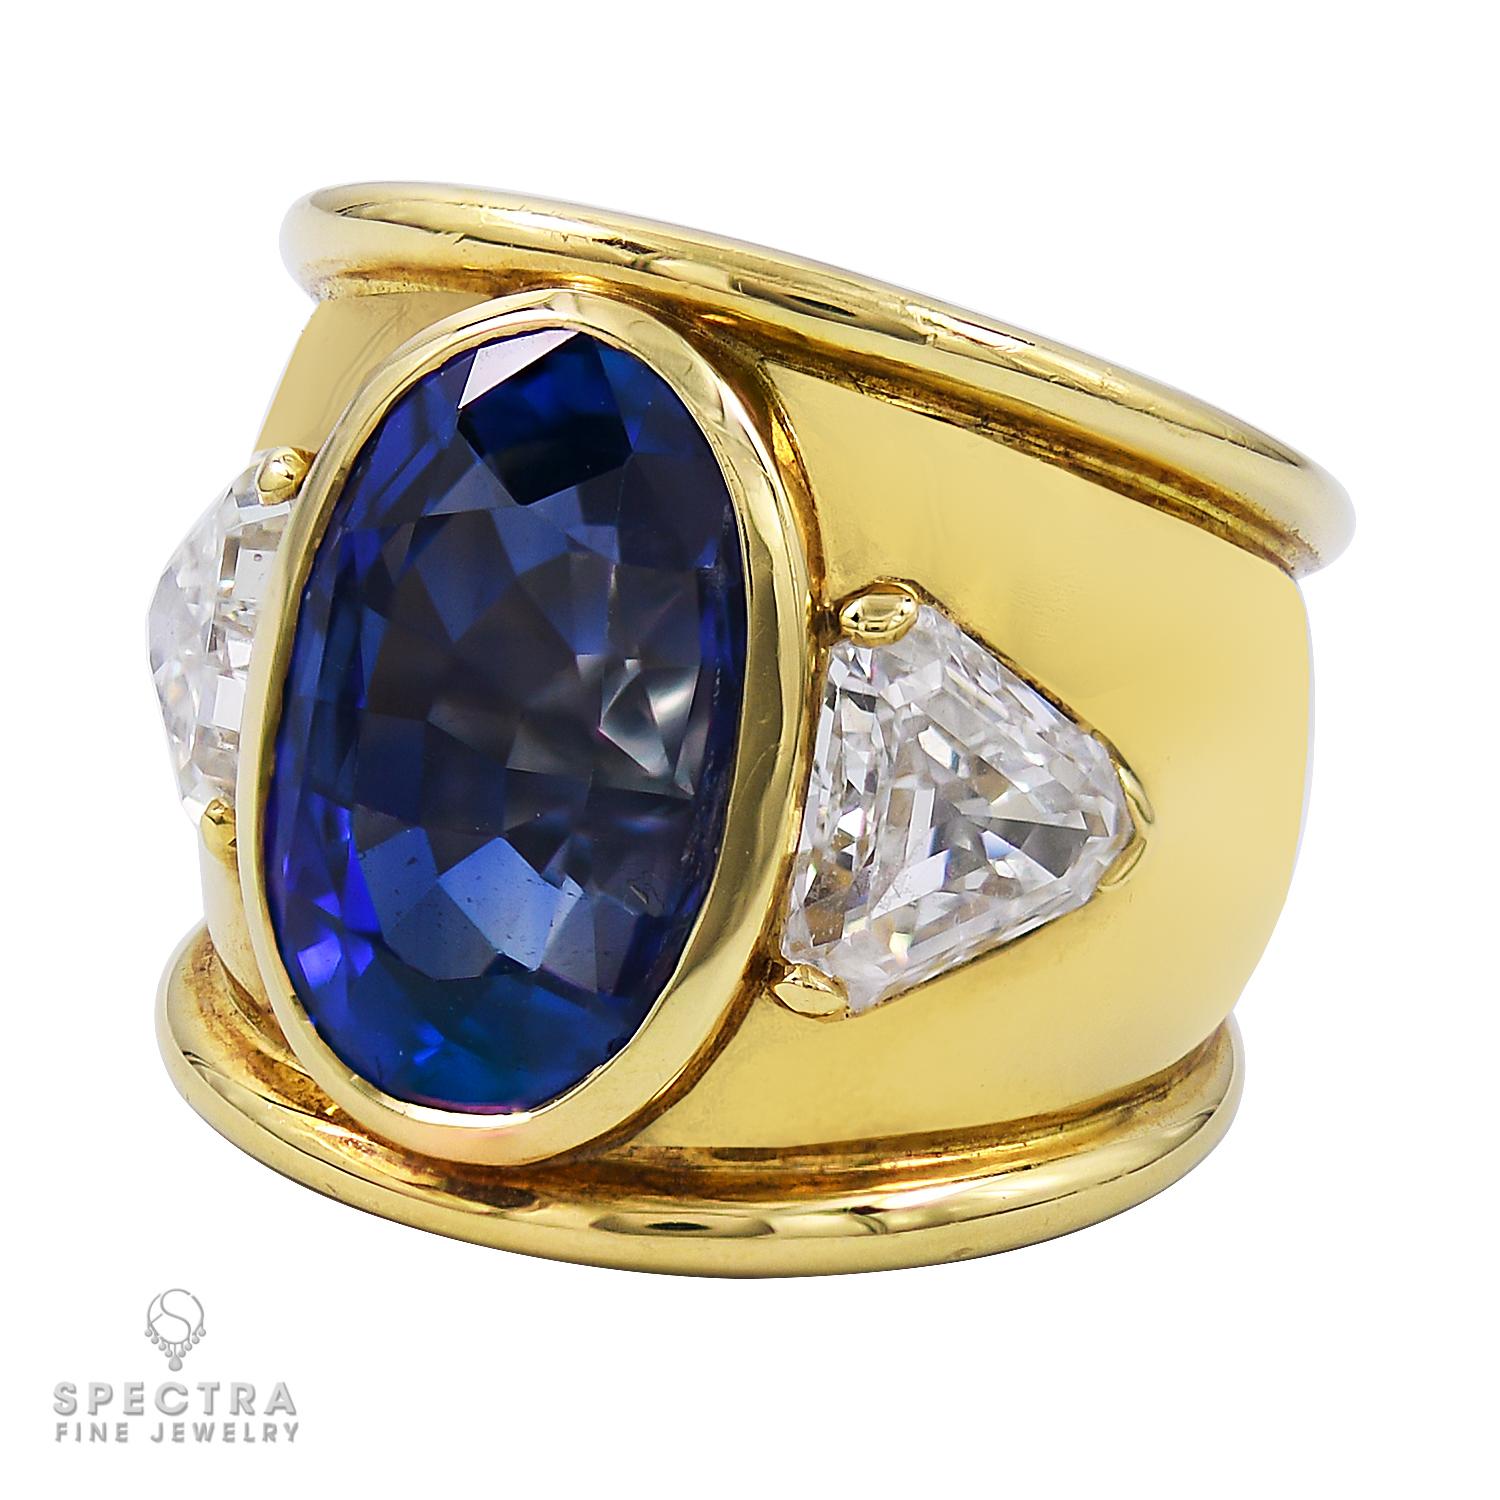 The rarest vintage ring from David Webb. Set with an oval-shaped sapphire weighing 17.65 carats. Sapphire is accompanied by the AGL Certificate stating that the sapphire is of Sri-Lankan (Ceylon) origin, with no gemological evidence of heat. Natural